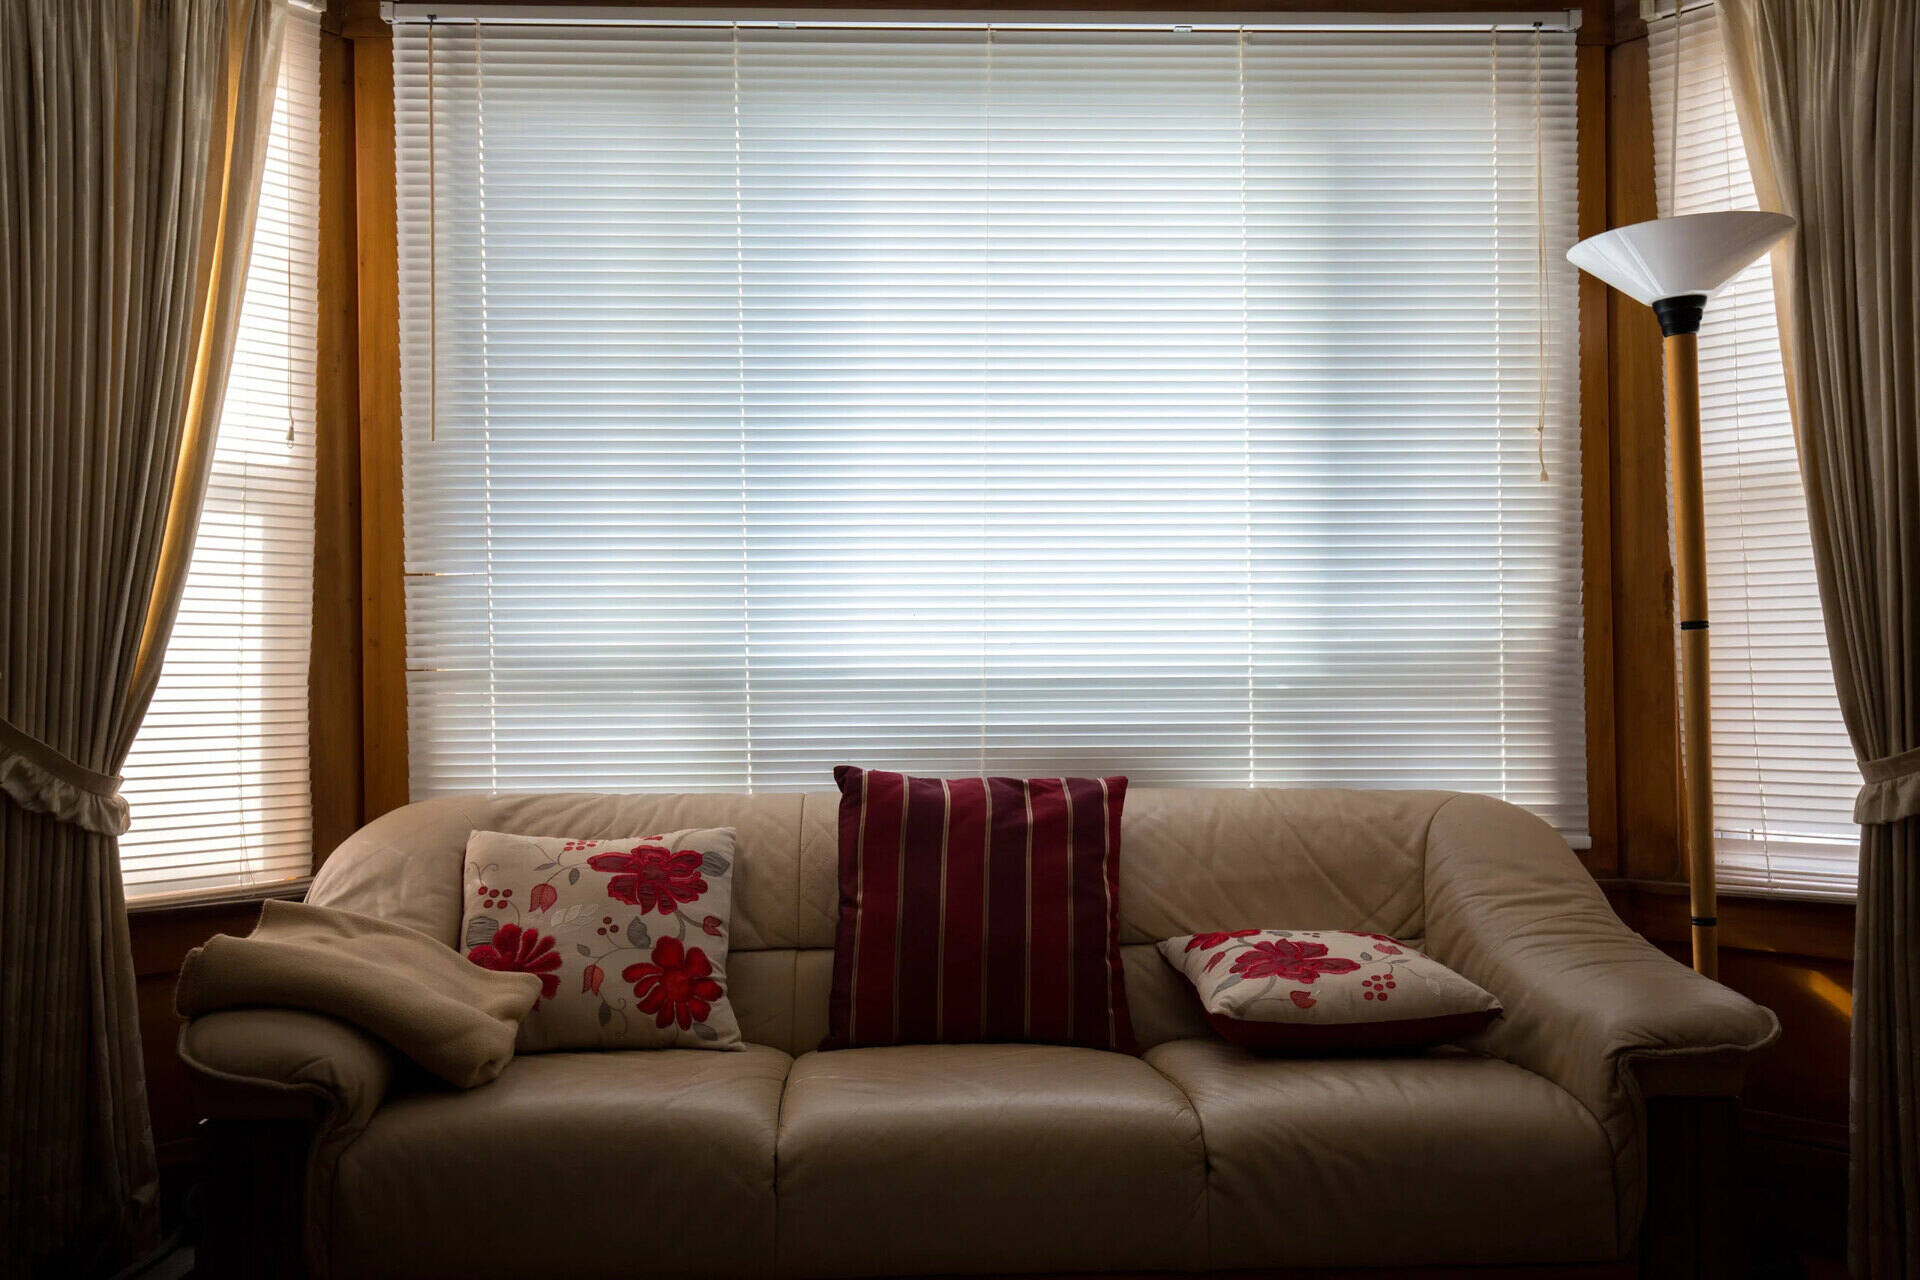 Blinds vs Curtains: Which Is Better?